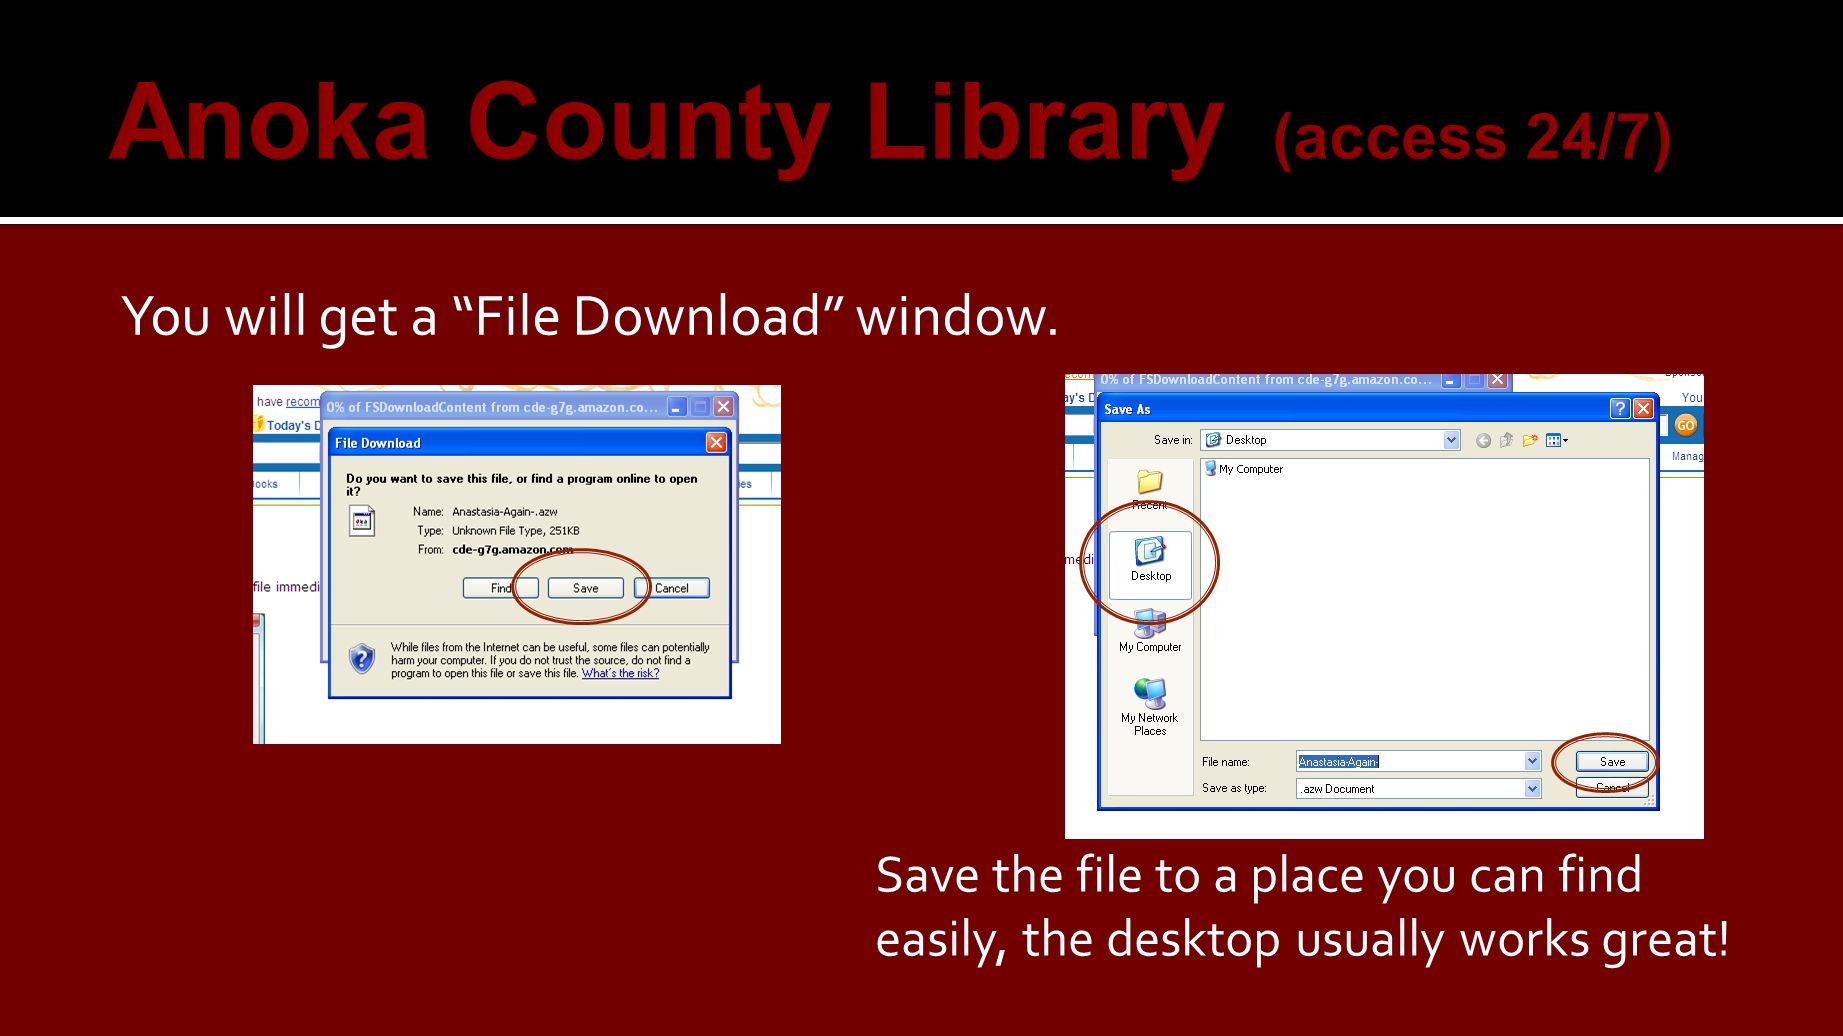 You will get a File Download window.